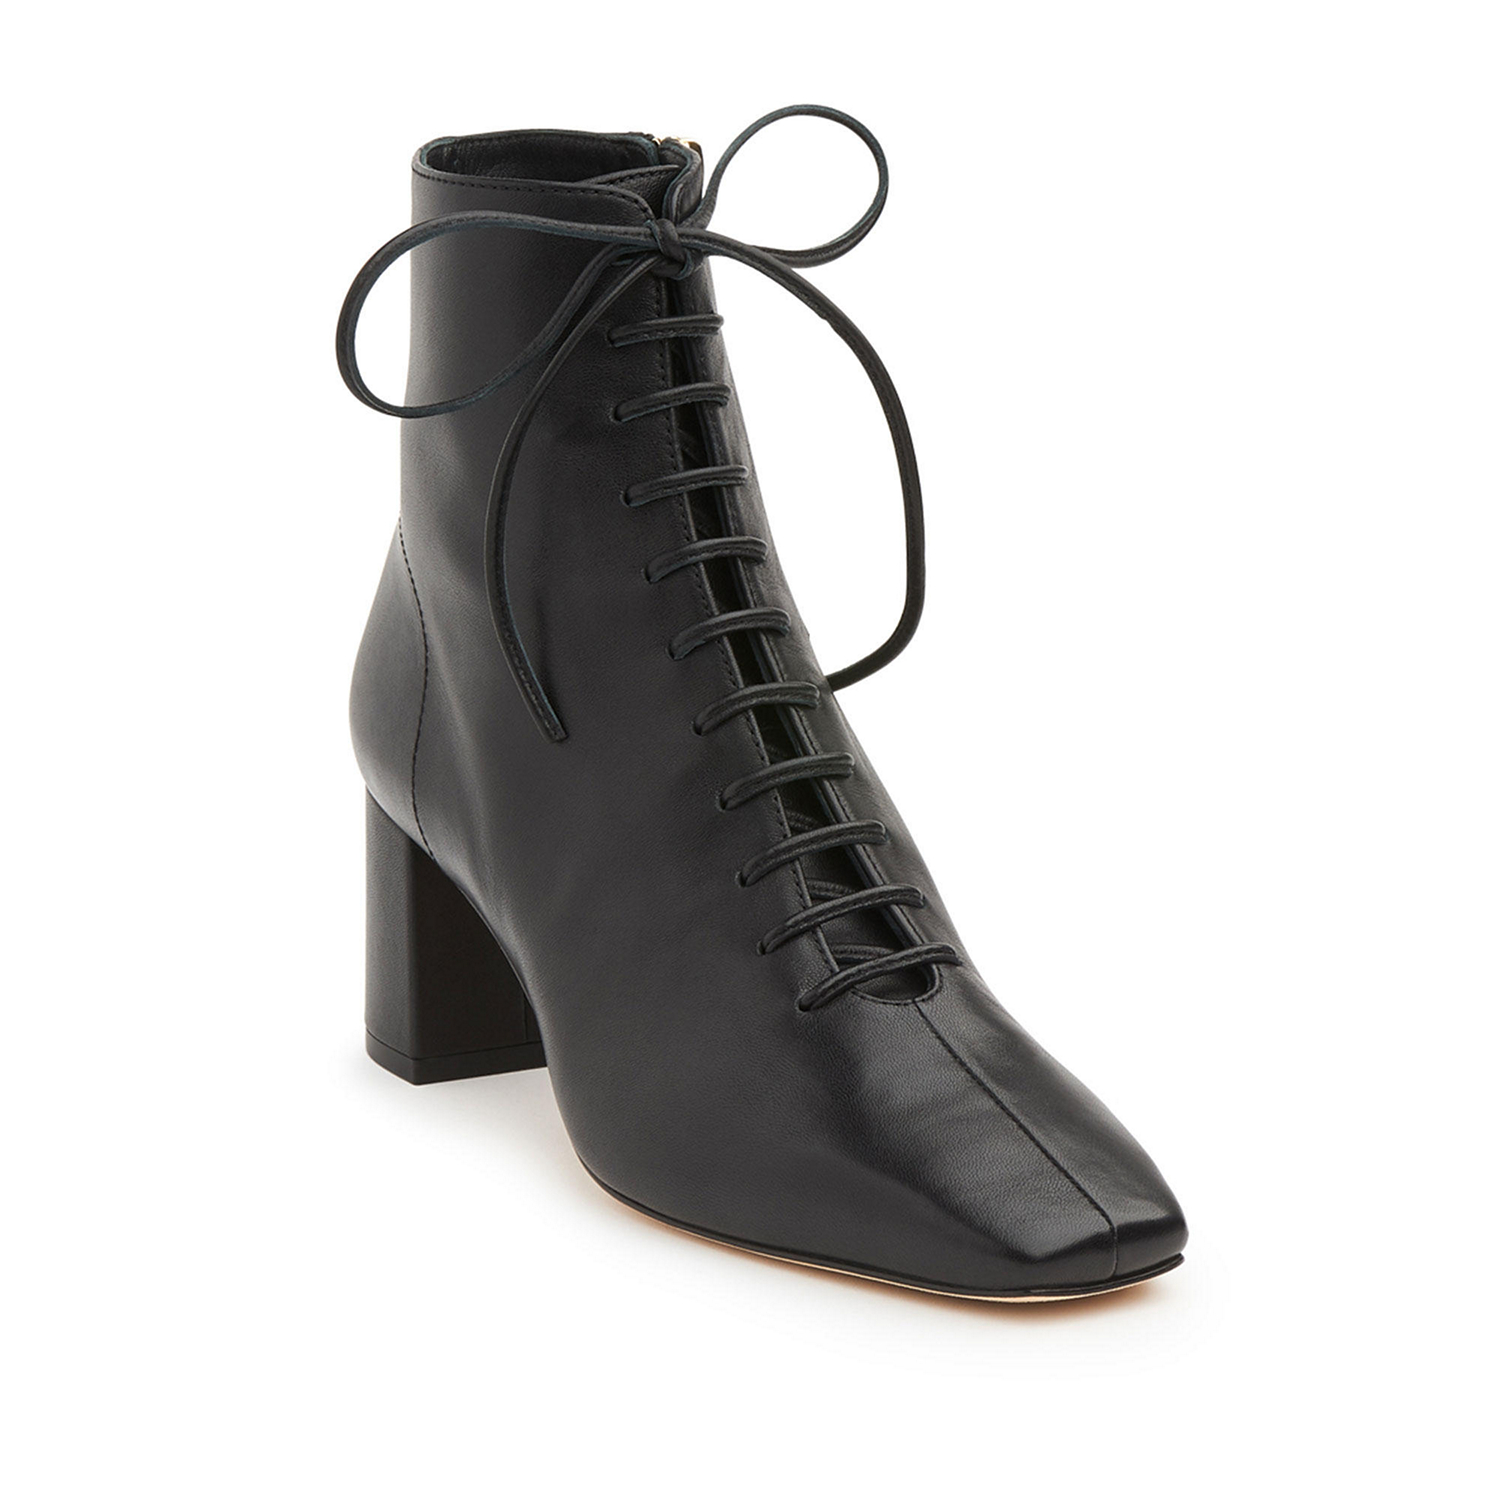 Arabella Lace-Up Ankle Boots